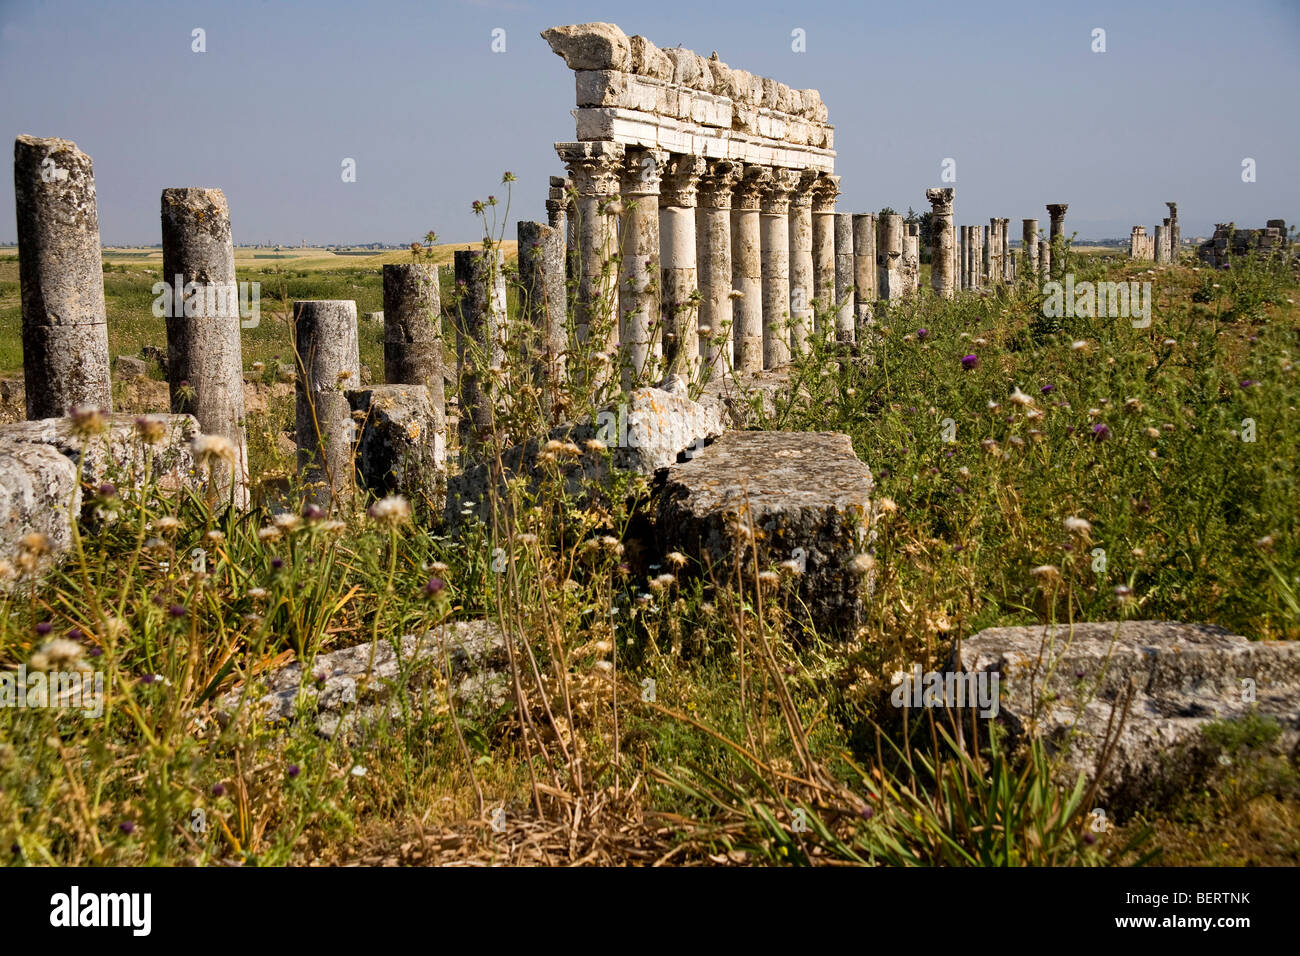 Roman ruins in the historic site of Apamea, Syria, Middle East, Asia Stock Photo